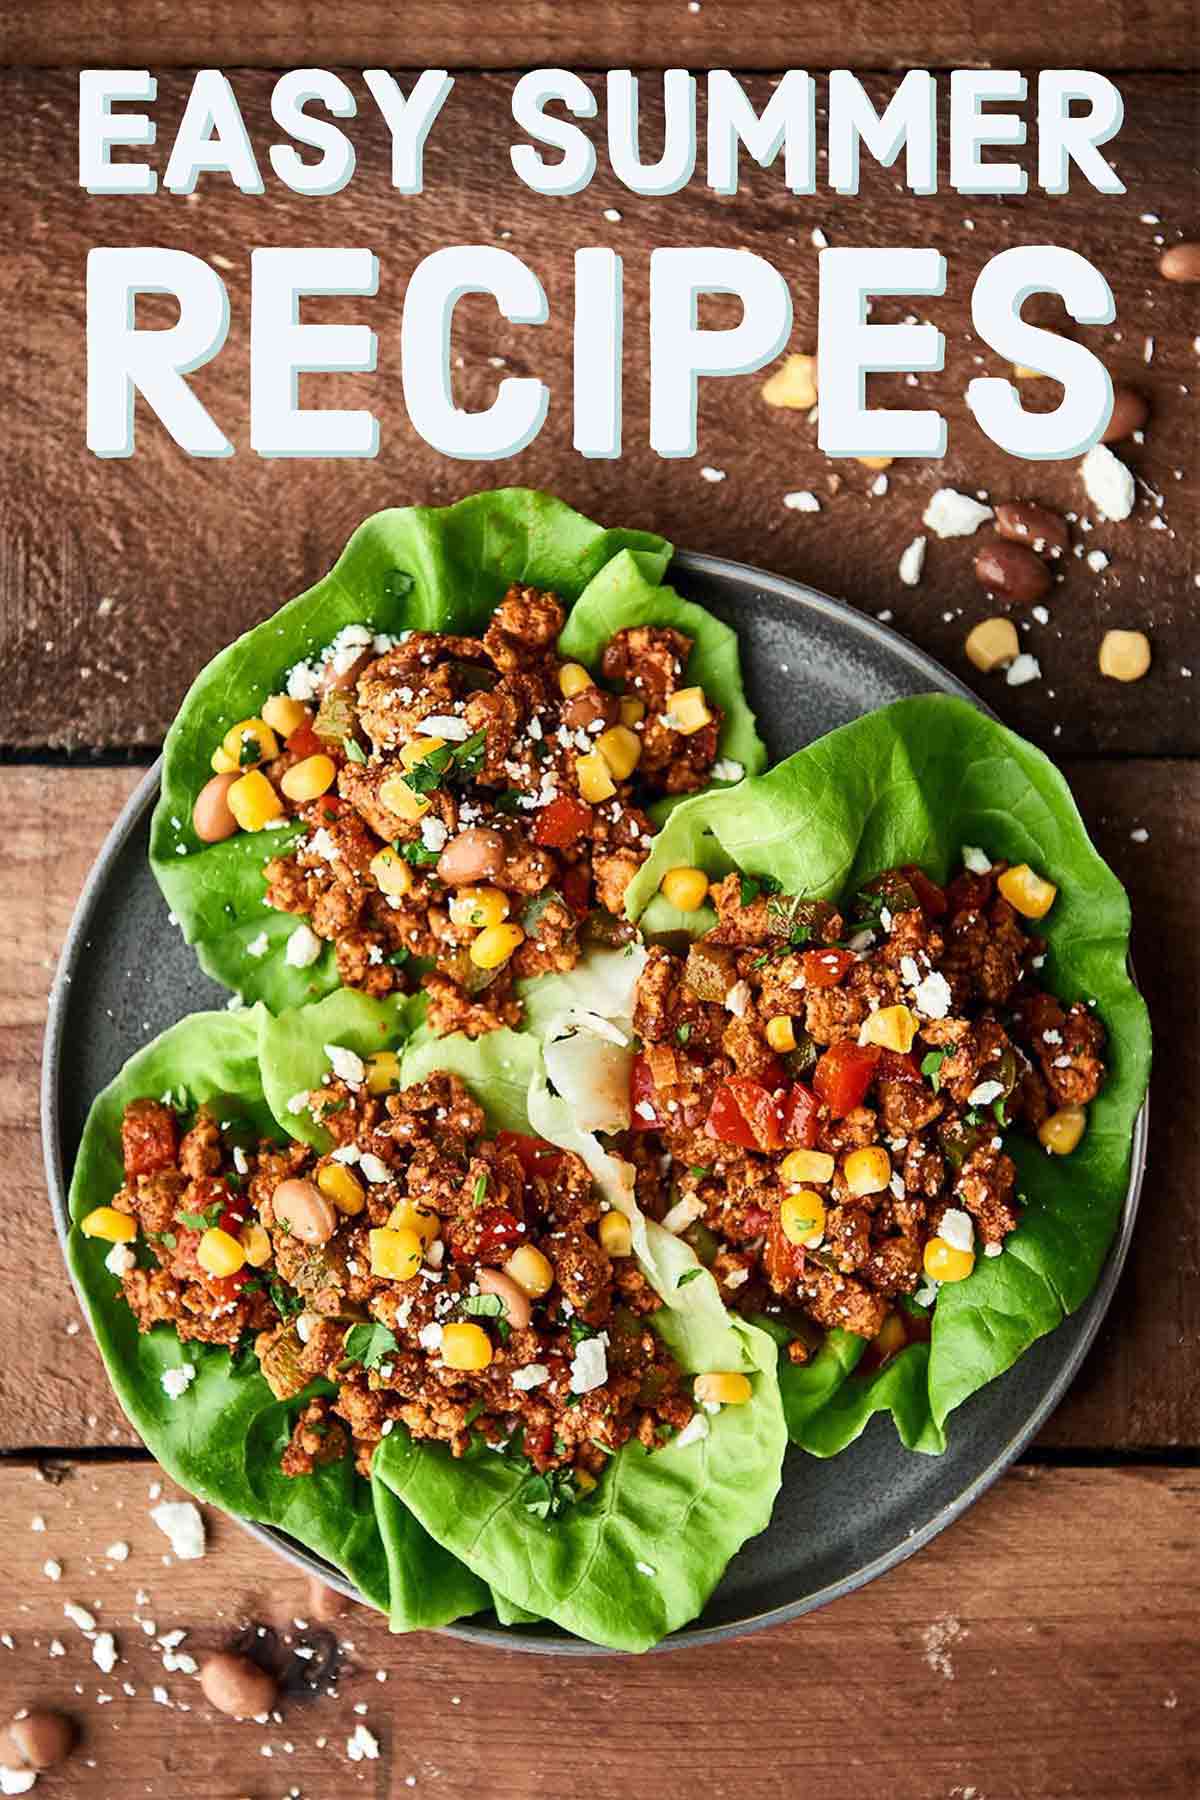 Easy Summer Recipes for breakfast, lunch, sides & salads, dinner, desserts, and drinks! Because let's be real, summer is all about less cooking inside and MORE playing outside! showmetheyummy.com #summer #recipes